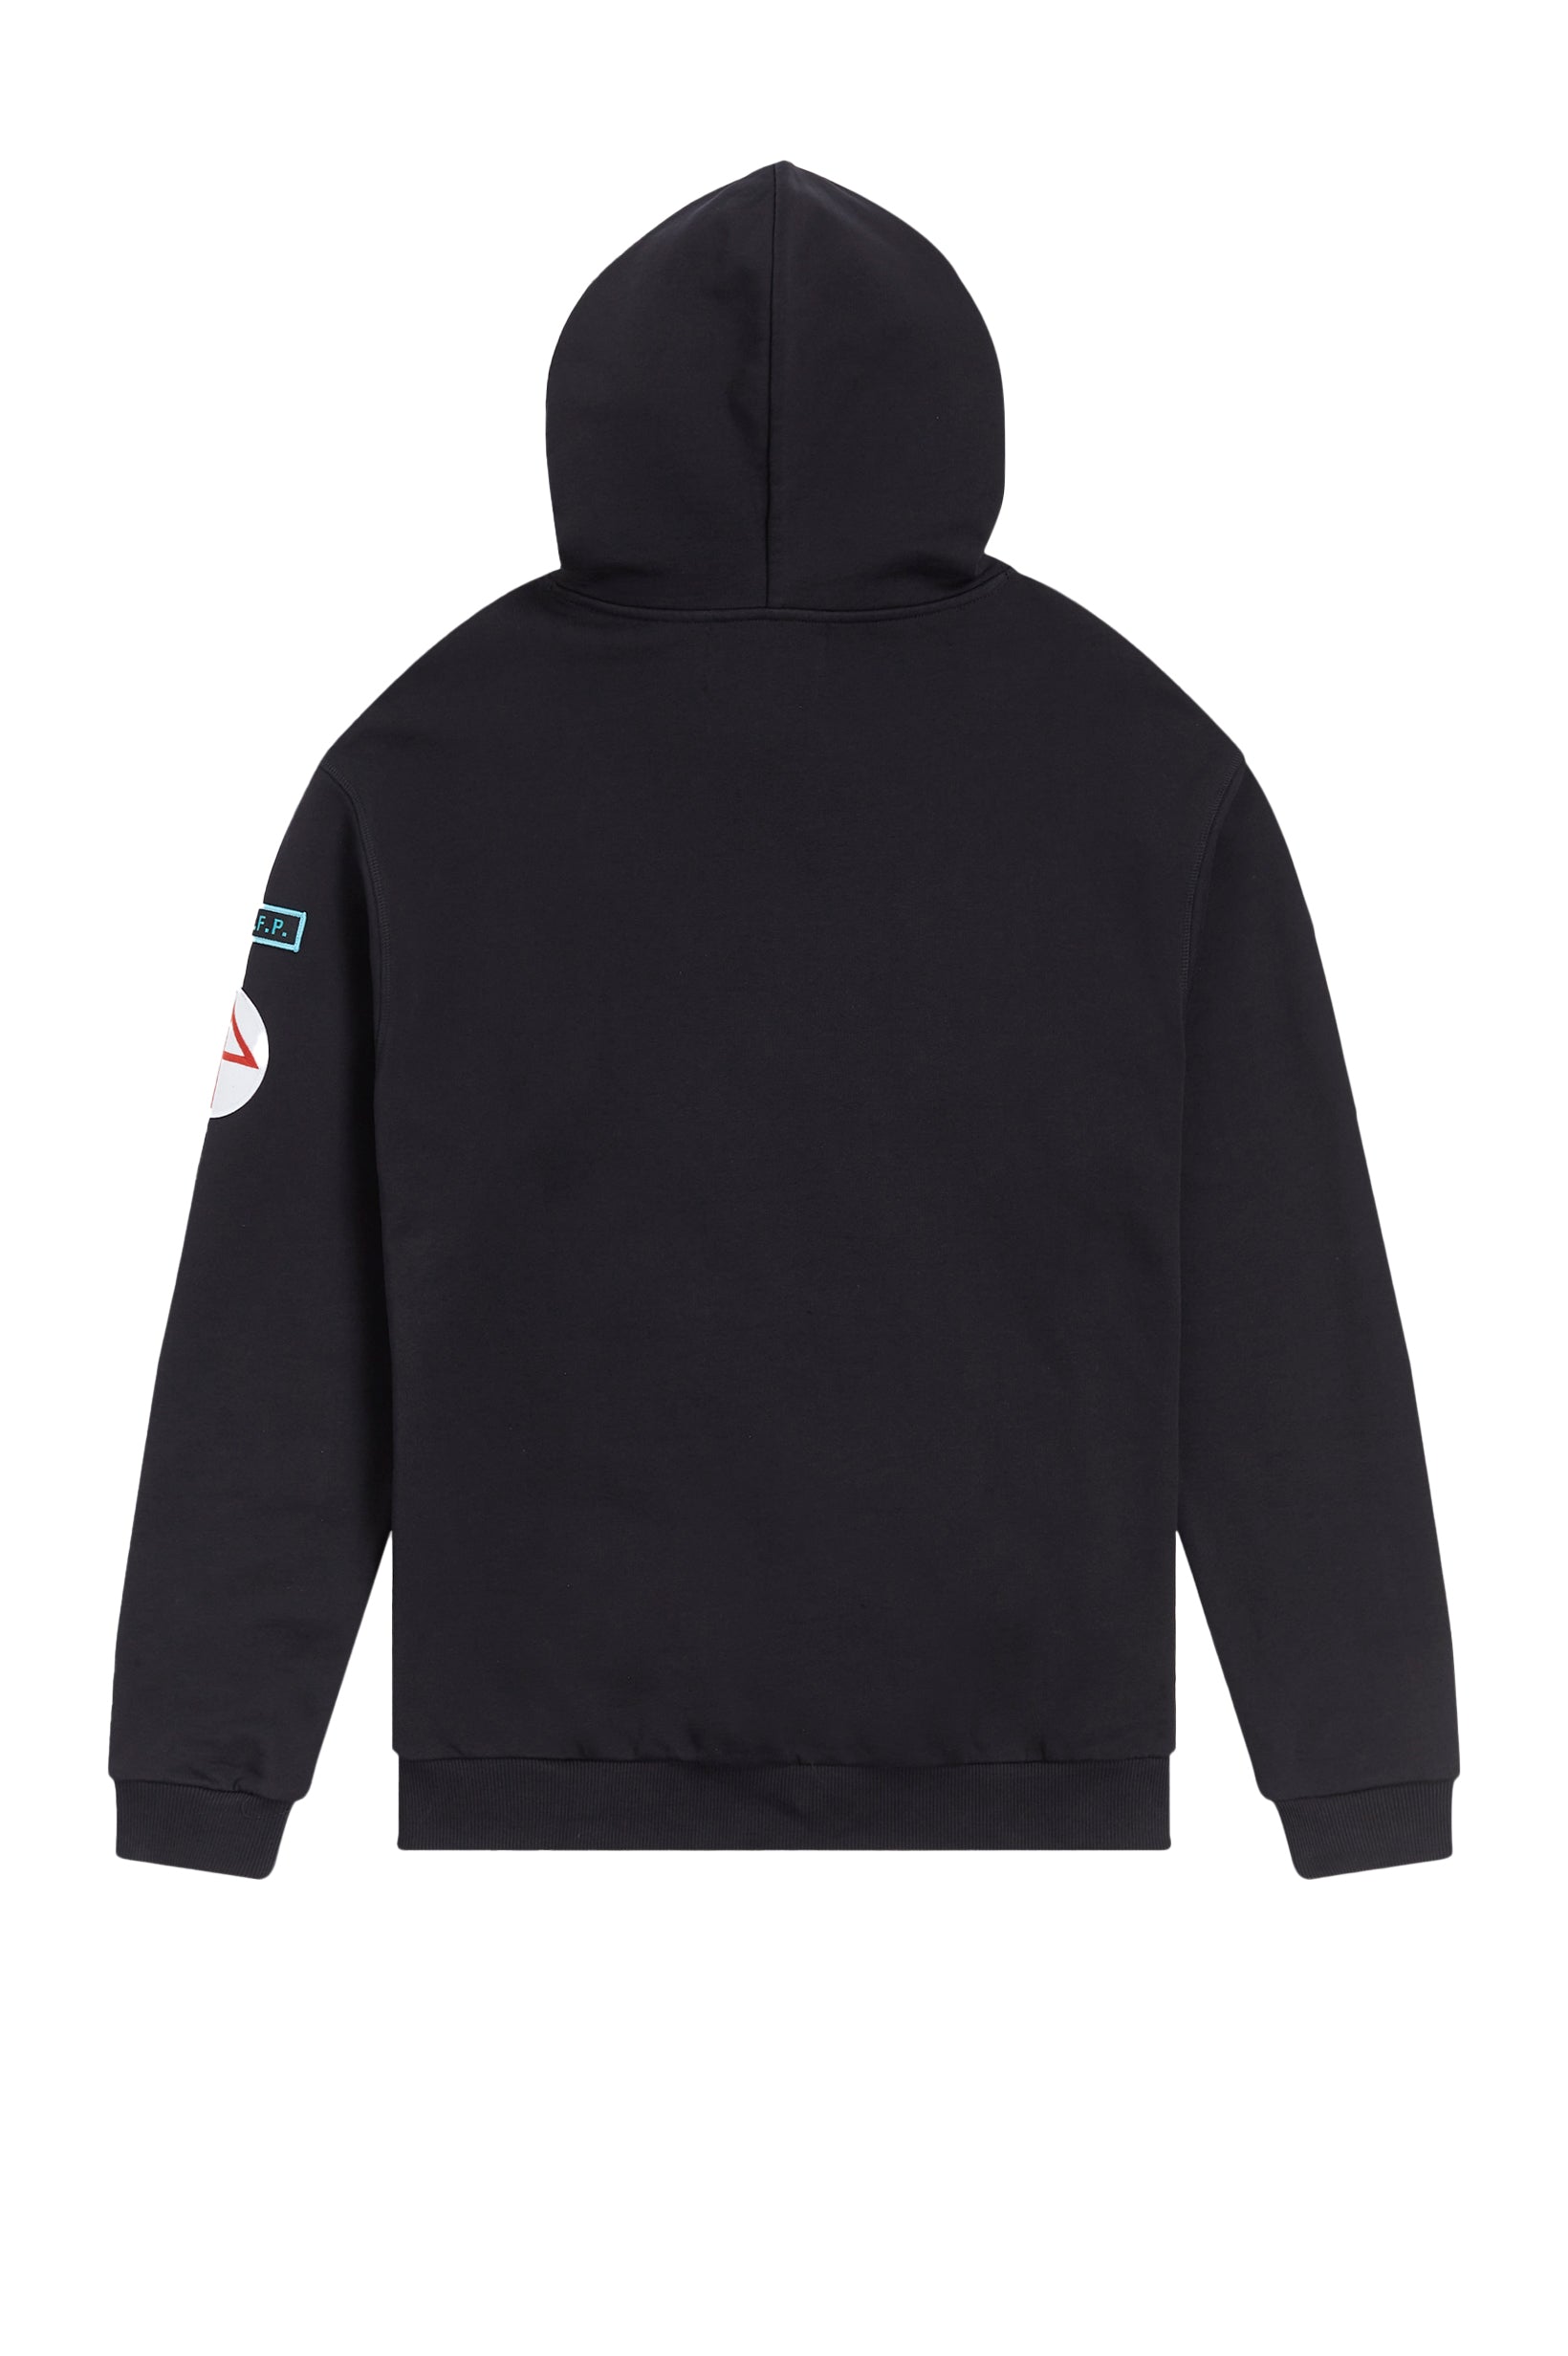 Fred Perry x Raf Simons Patched Overhead Hoodie Black